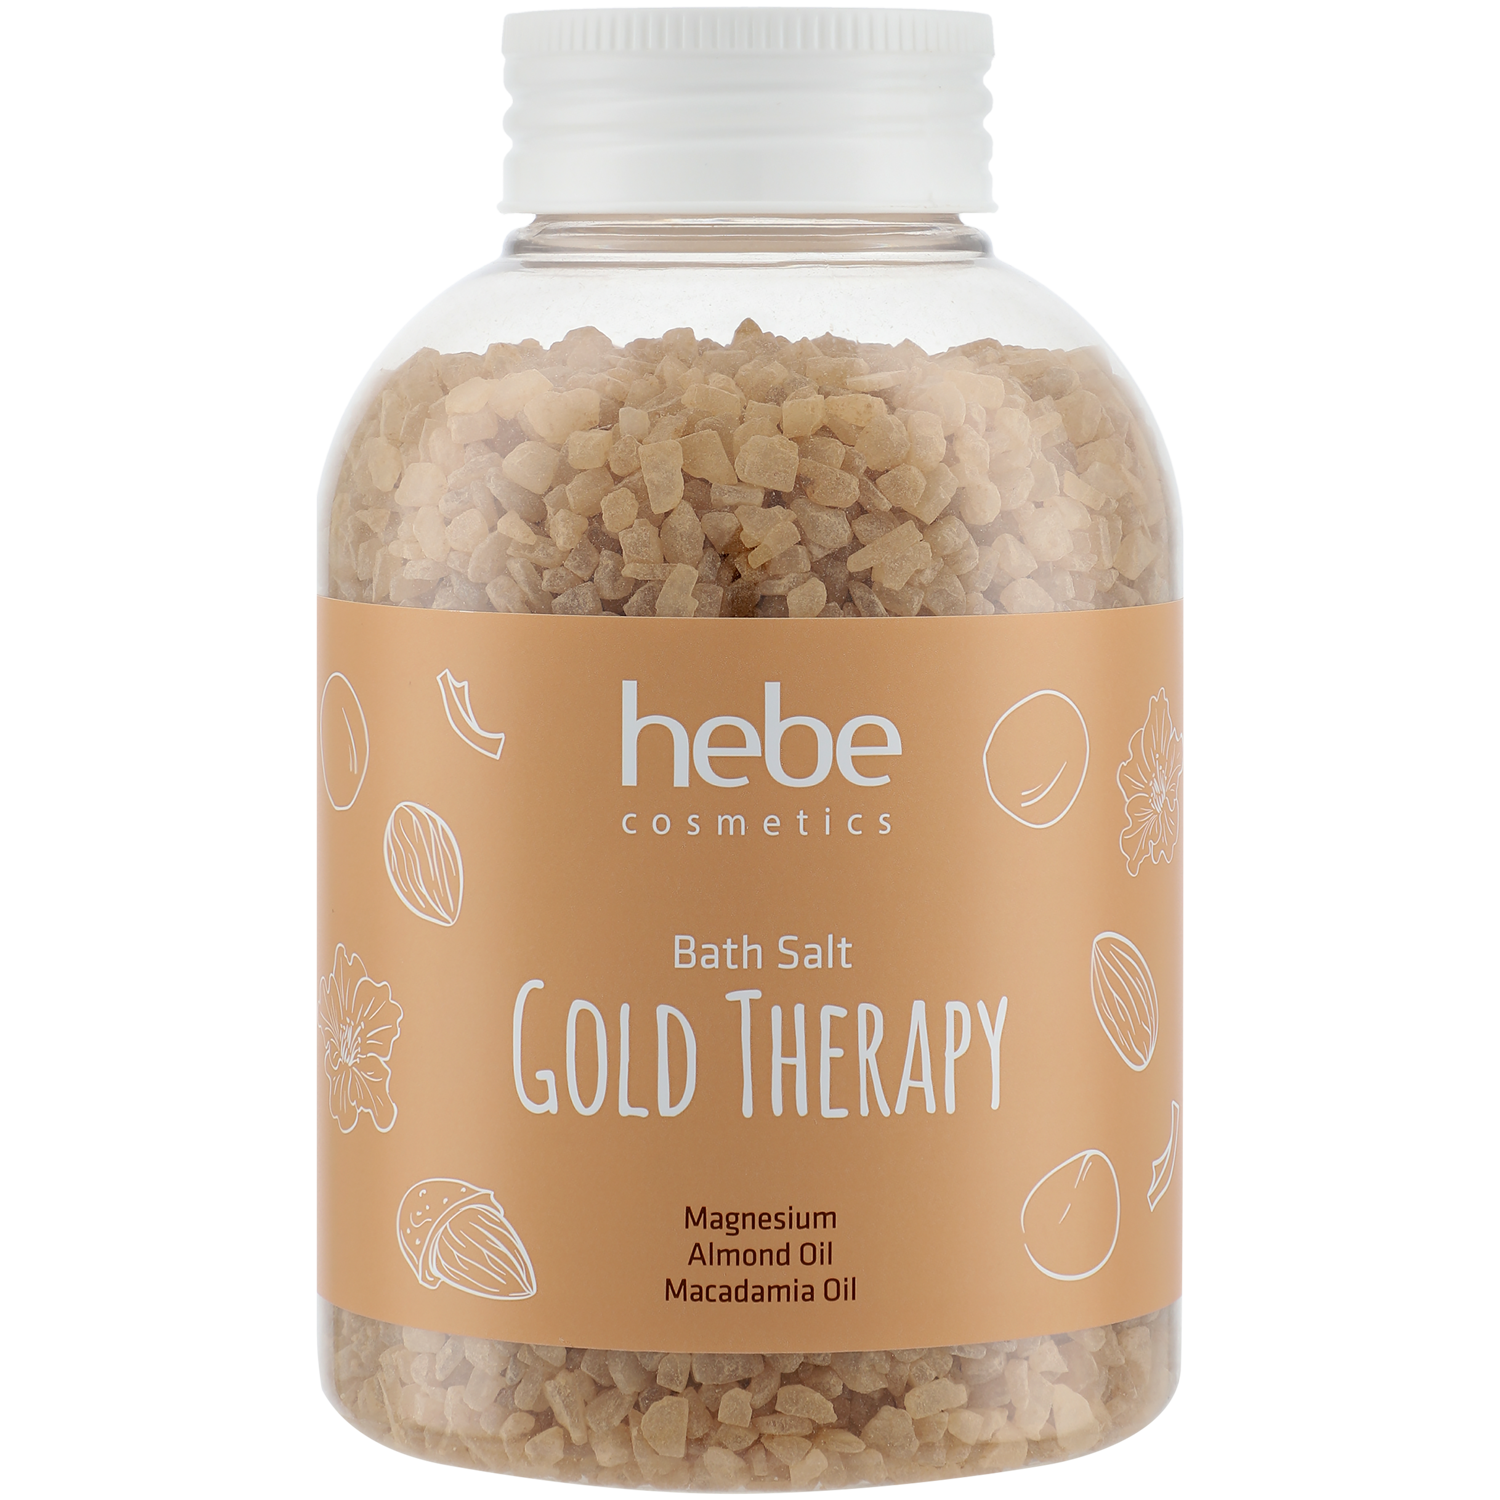 Hebe Cosmetics Gold Therapy sól do kąpieli, 600 g | hebe.pl